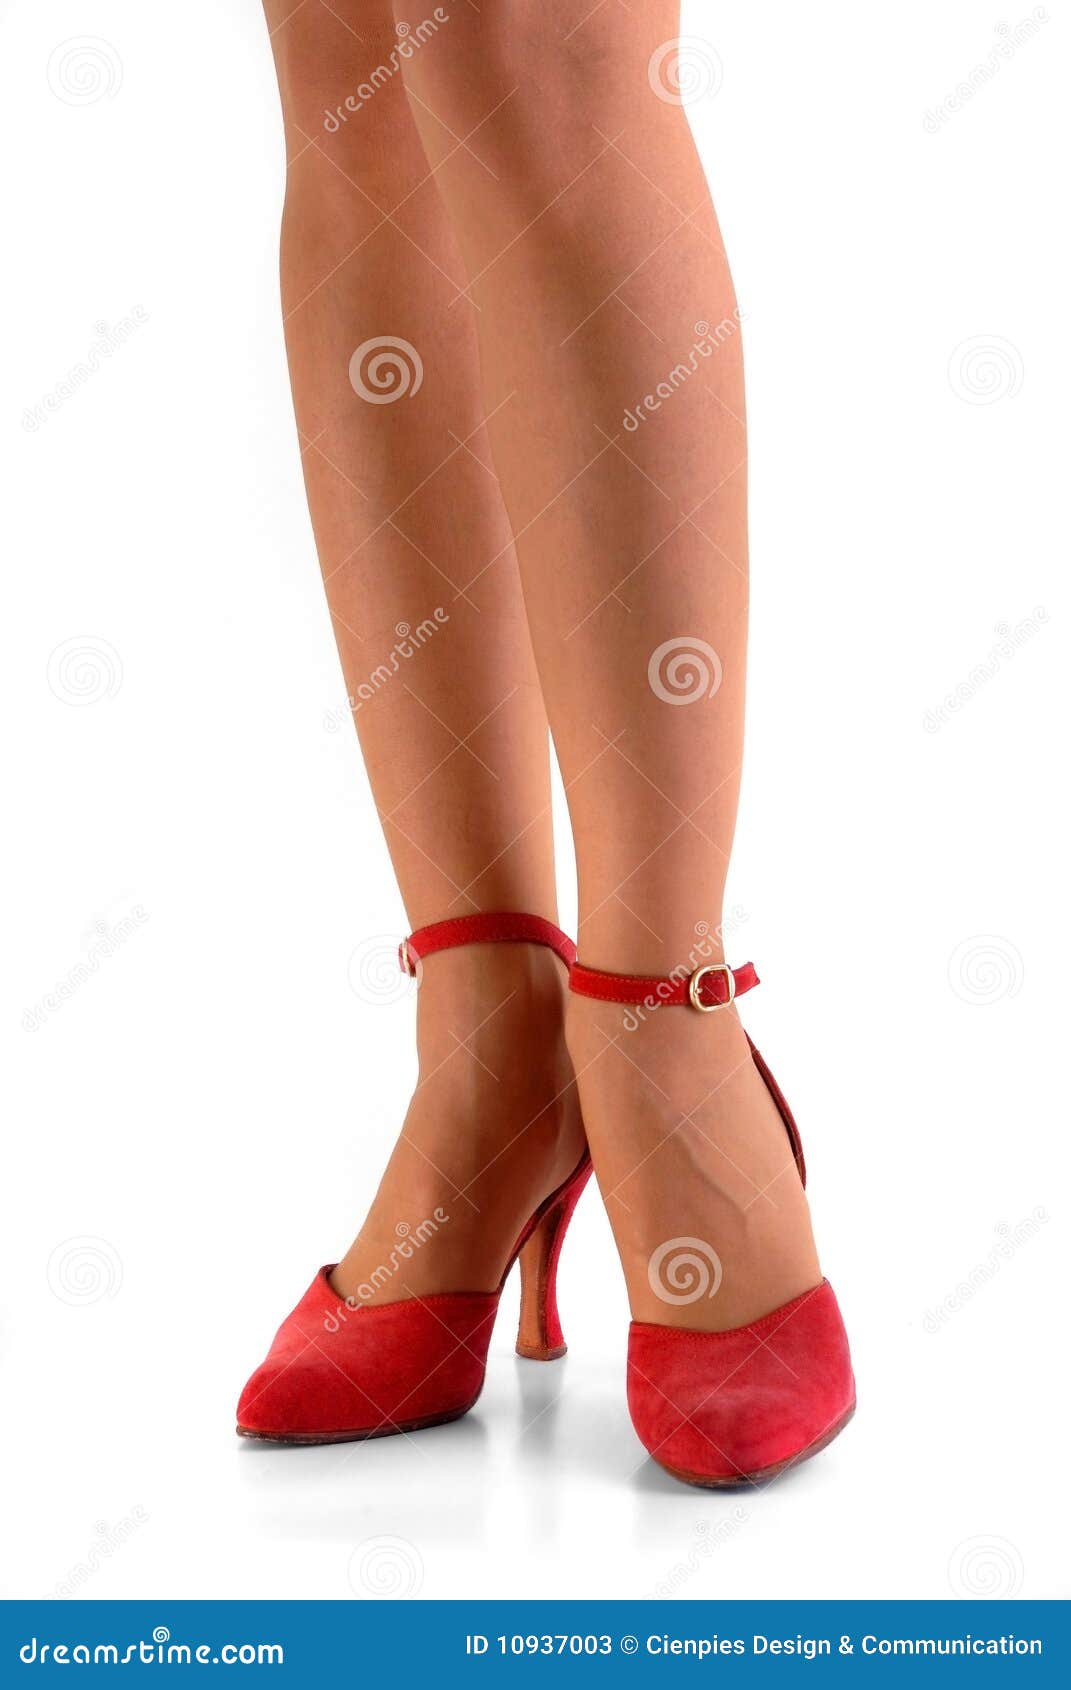 Legs In Red Shoes Isolated On White Background Stock